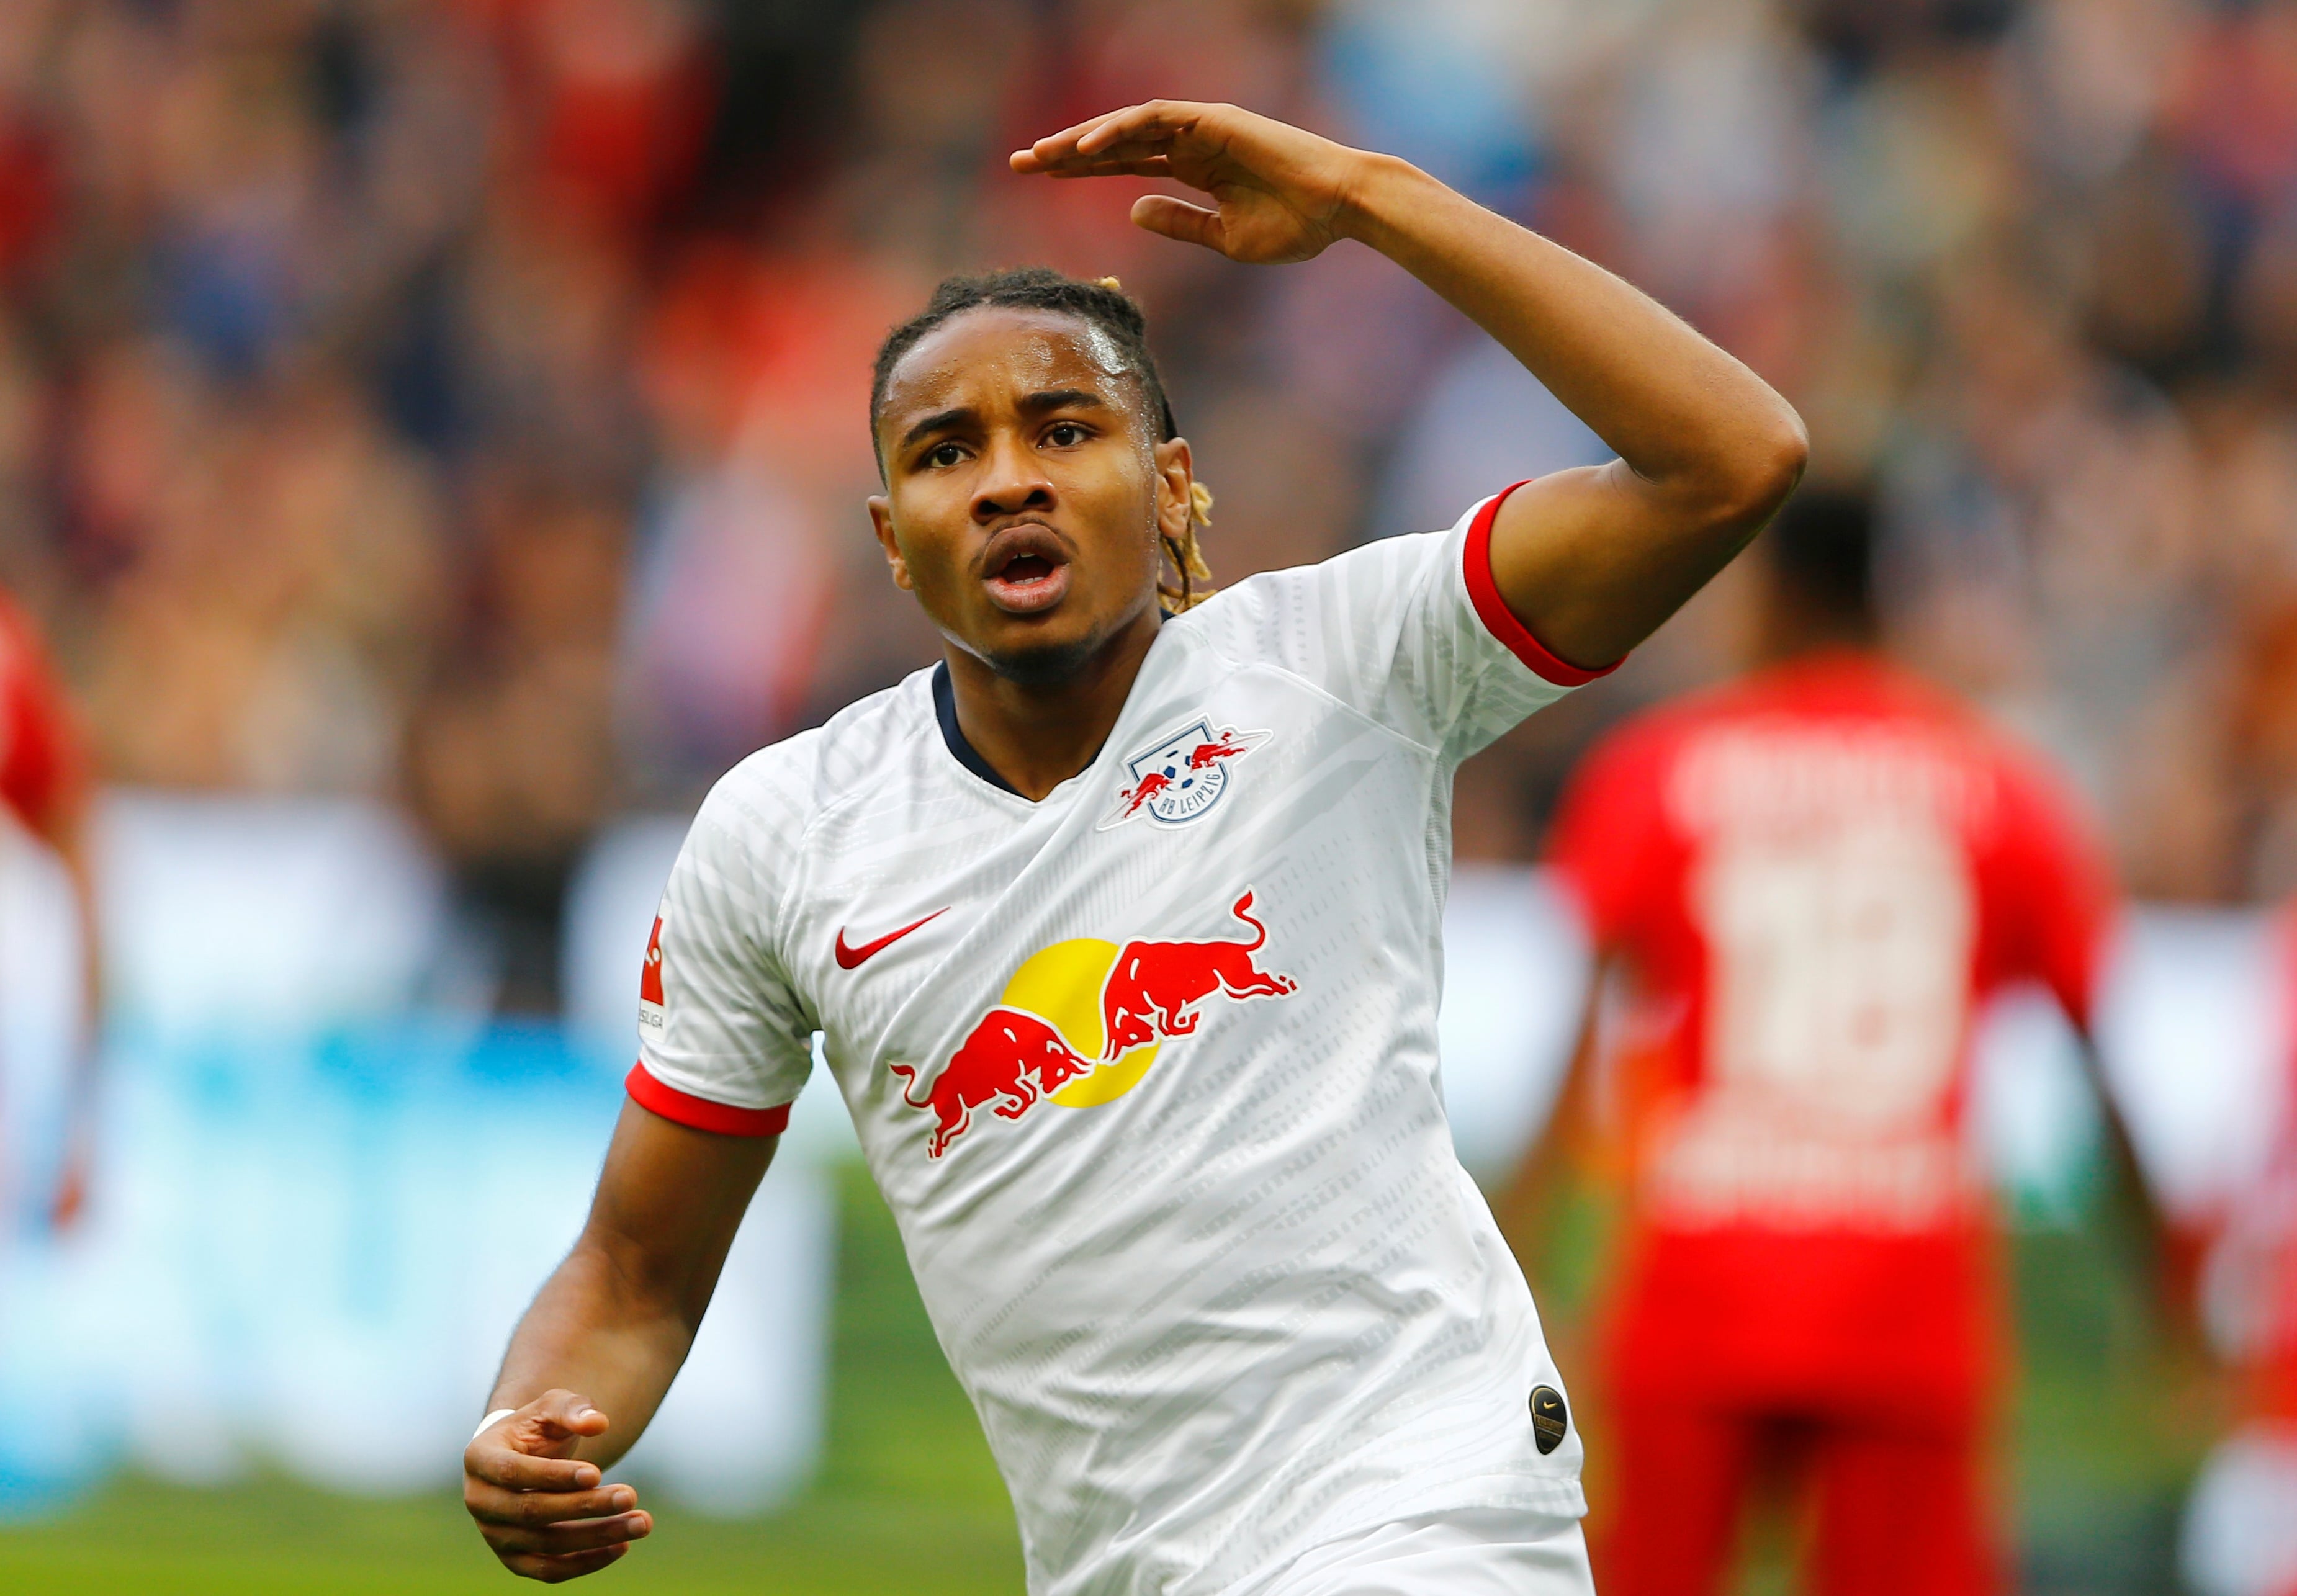 Top 5 players to keep an eye on in Bundesliga in 2019-20